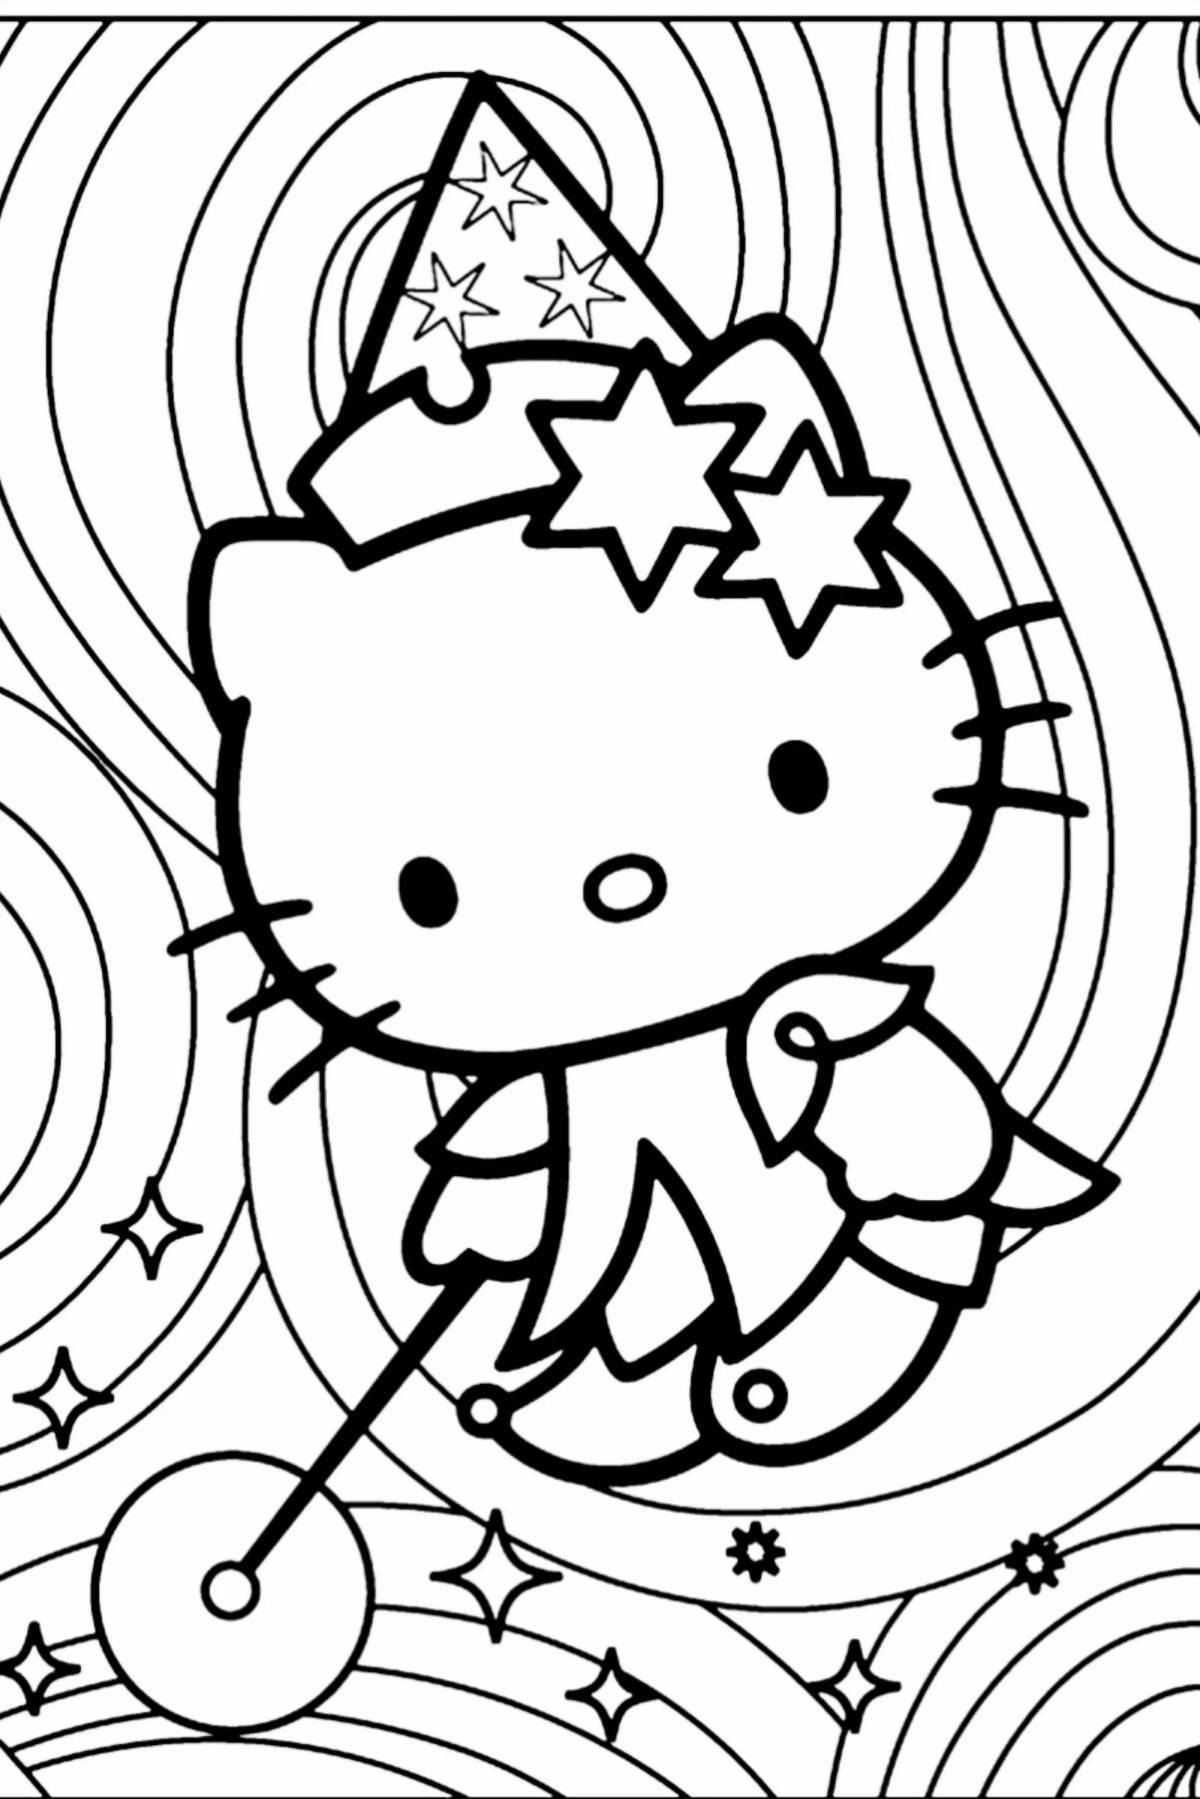 Intriguing hello kitty coloring book